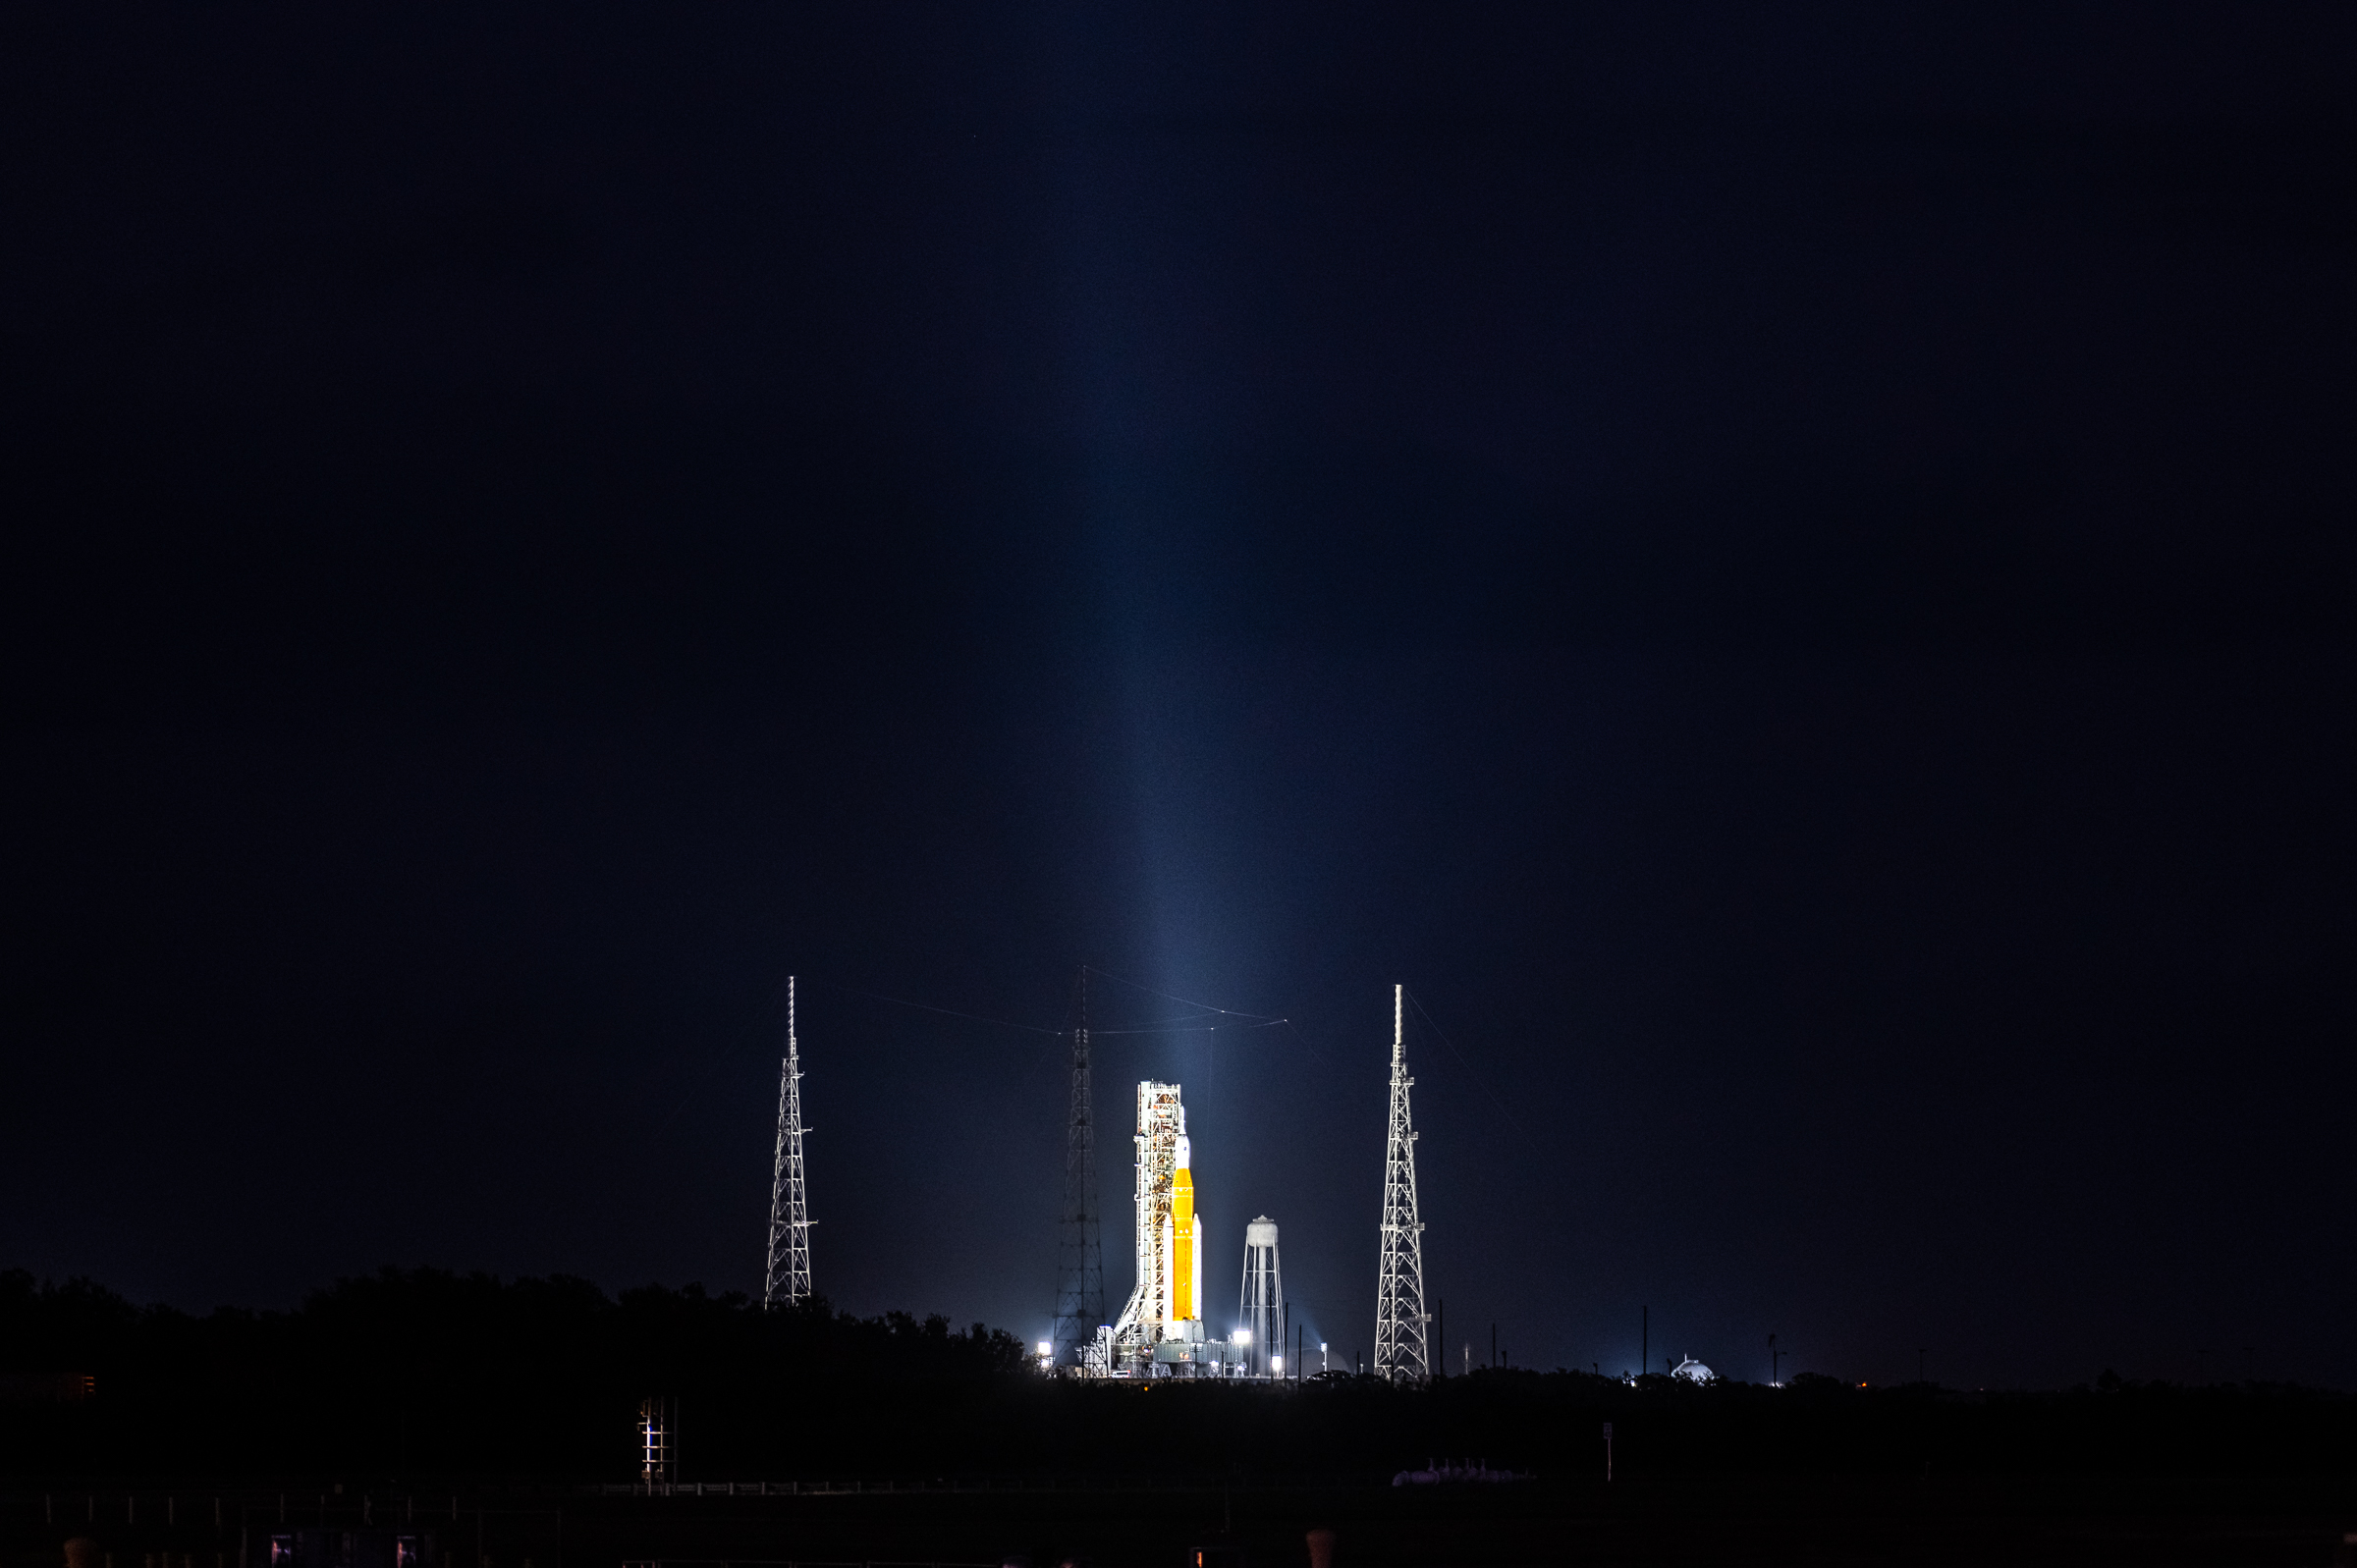 SLS on the pad at night. Seen from the KSC Press Site.